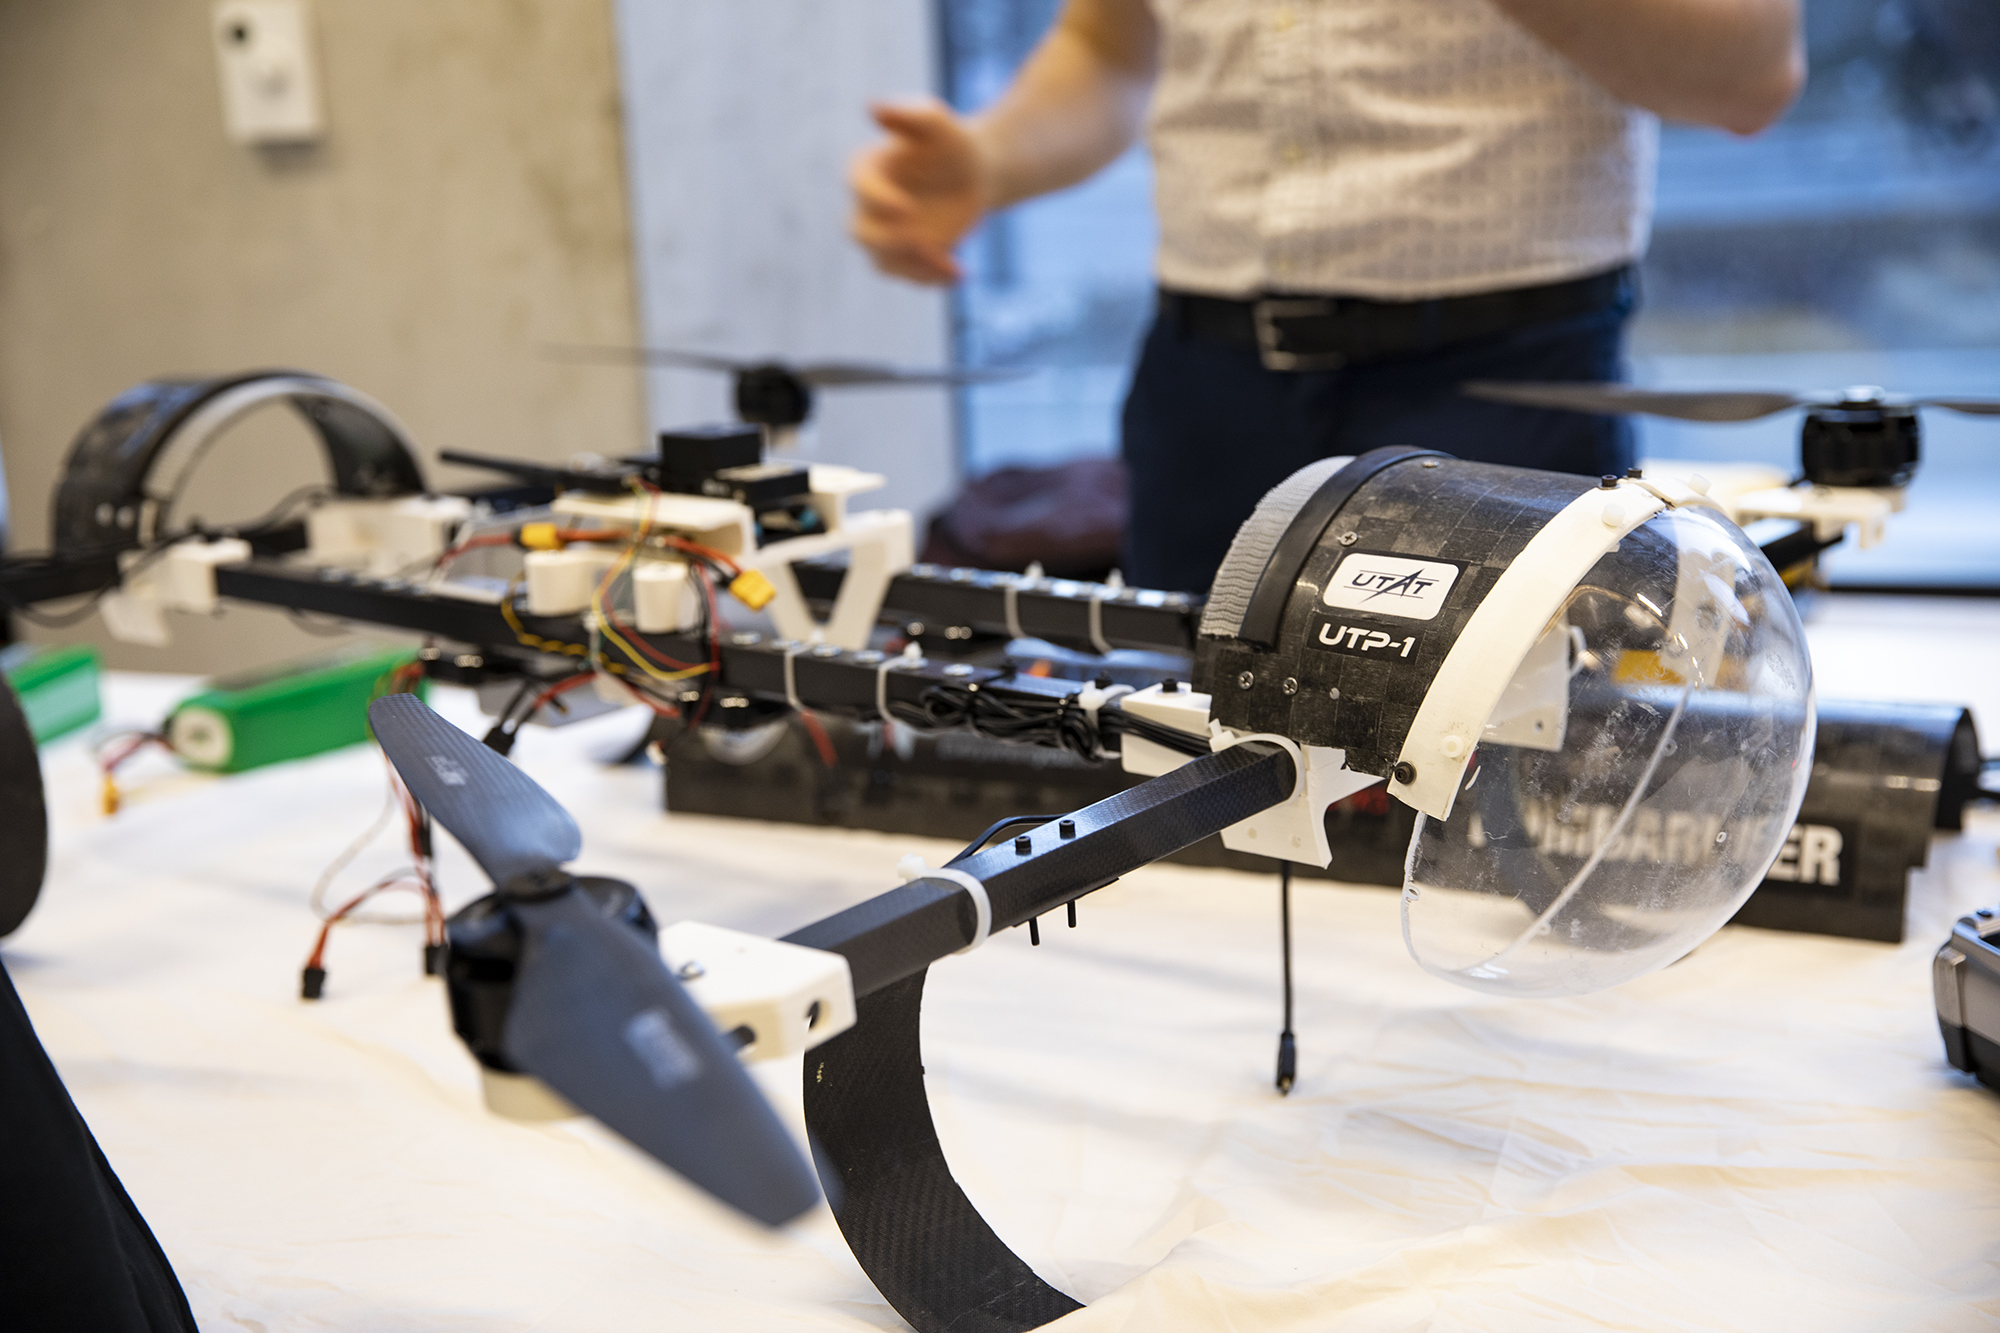 The UTP1 is the latest addition to the UTAT drone fleet and will be taking part in the 2019 Student UAS Competition in Alma, Quebec. (Credit: Erica Rae Chong)